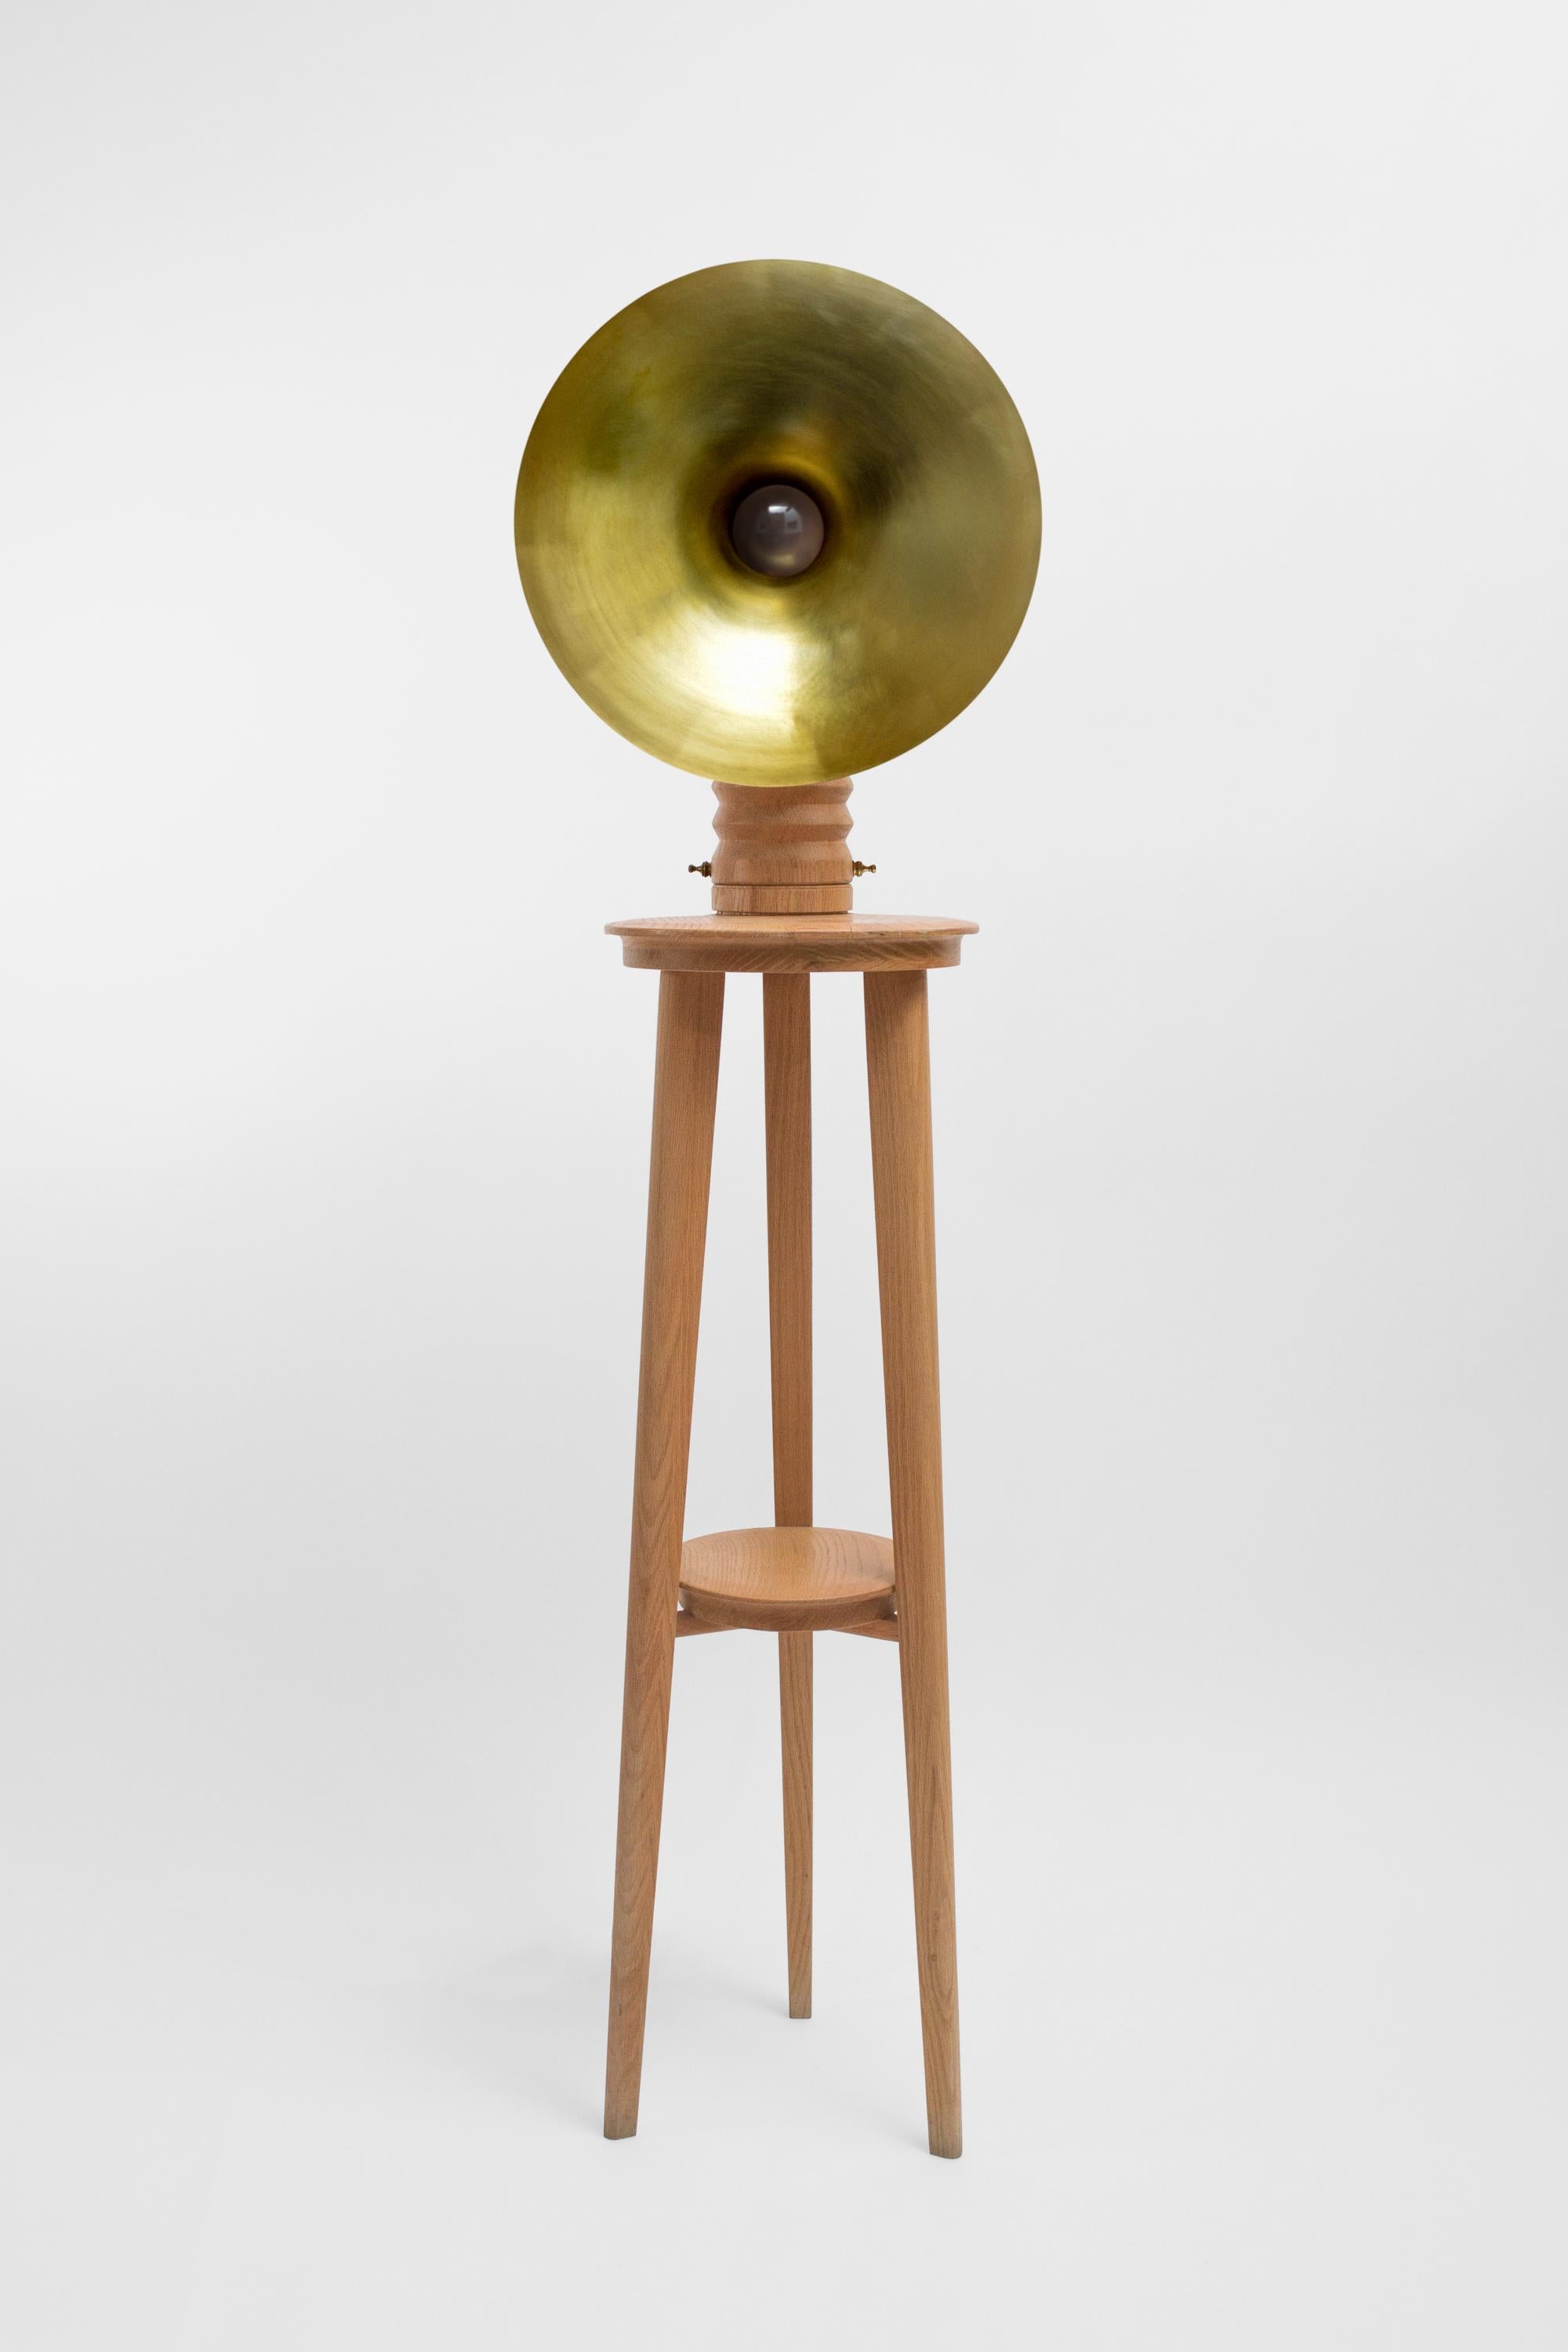 Sousaphone floor lamp by Acoocooro
Dimensions: W 40 x D 29 x H 152 cm.
Materials: Two-tier solid oak wood tripod; copper or brass screen, and resin difuser; and brass accents and lightswitch.

All our lamps can be wired according to each